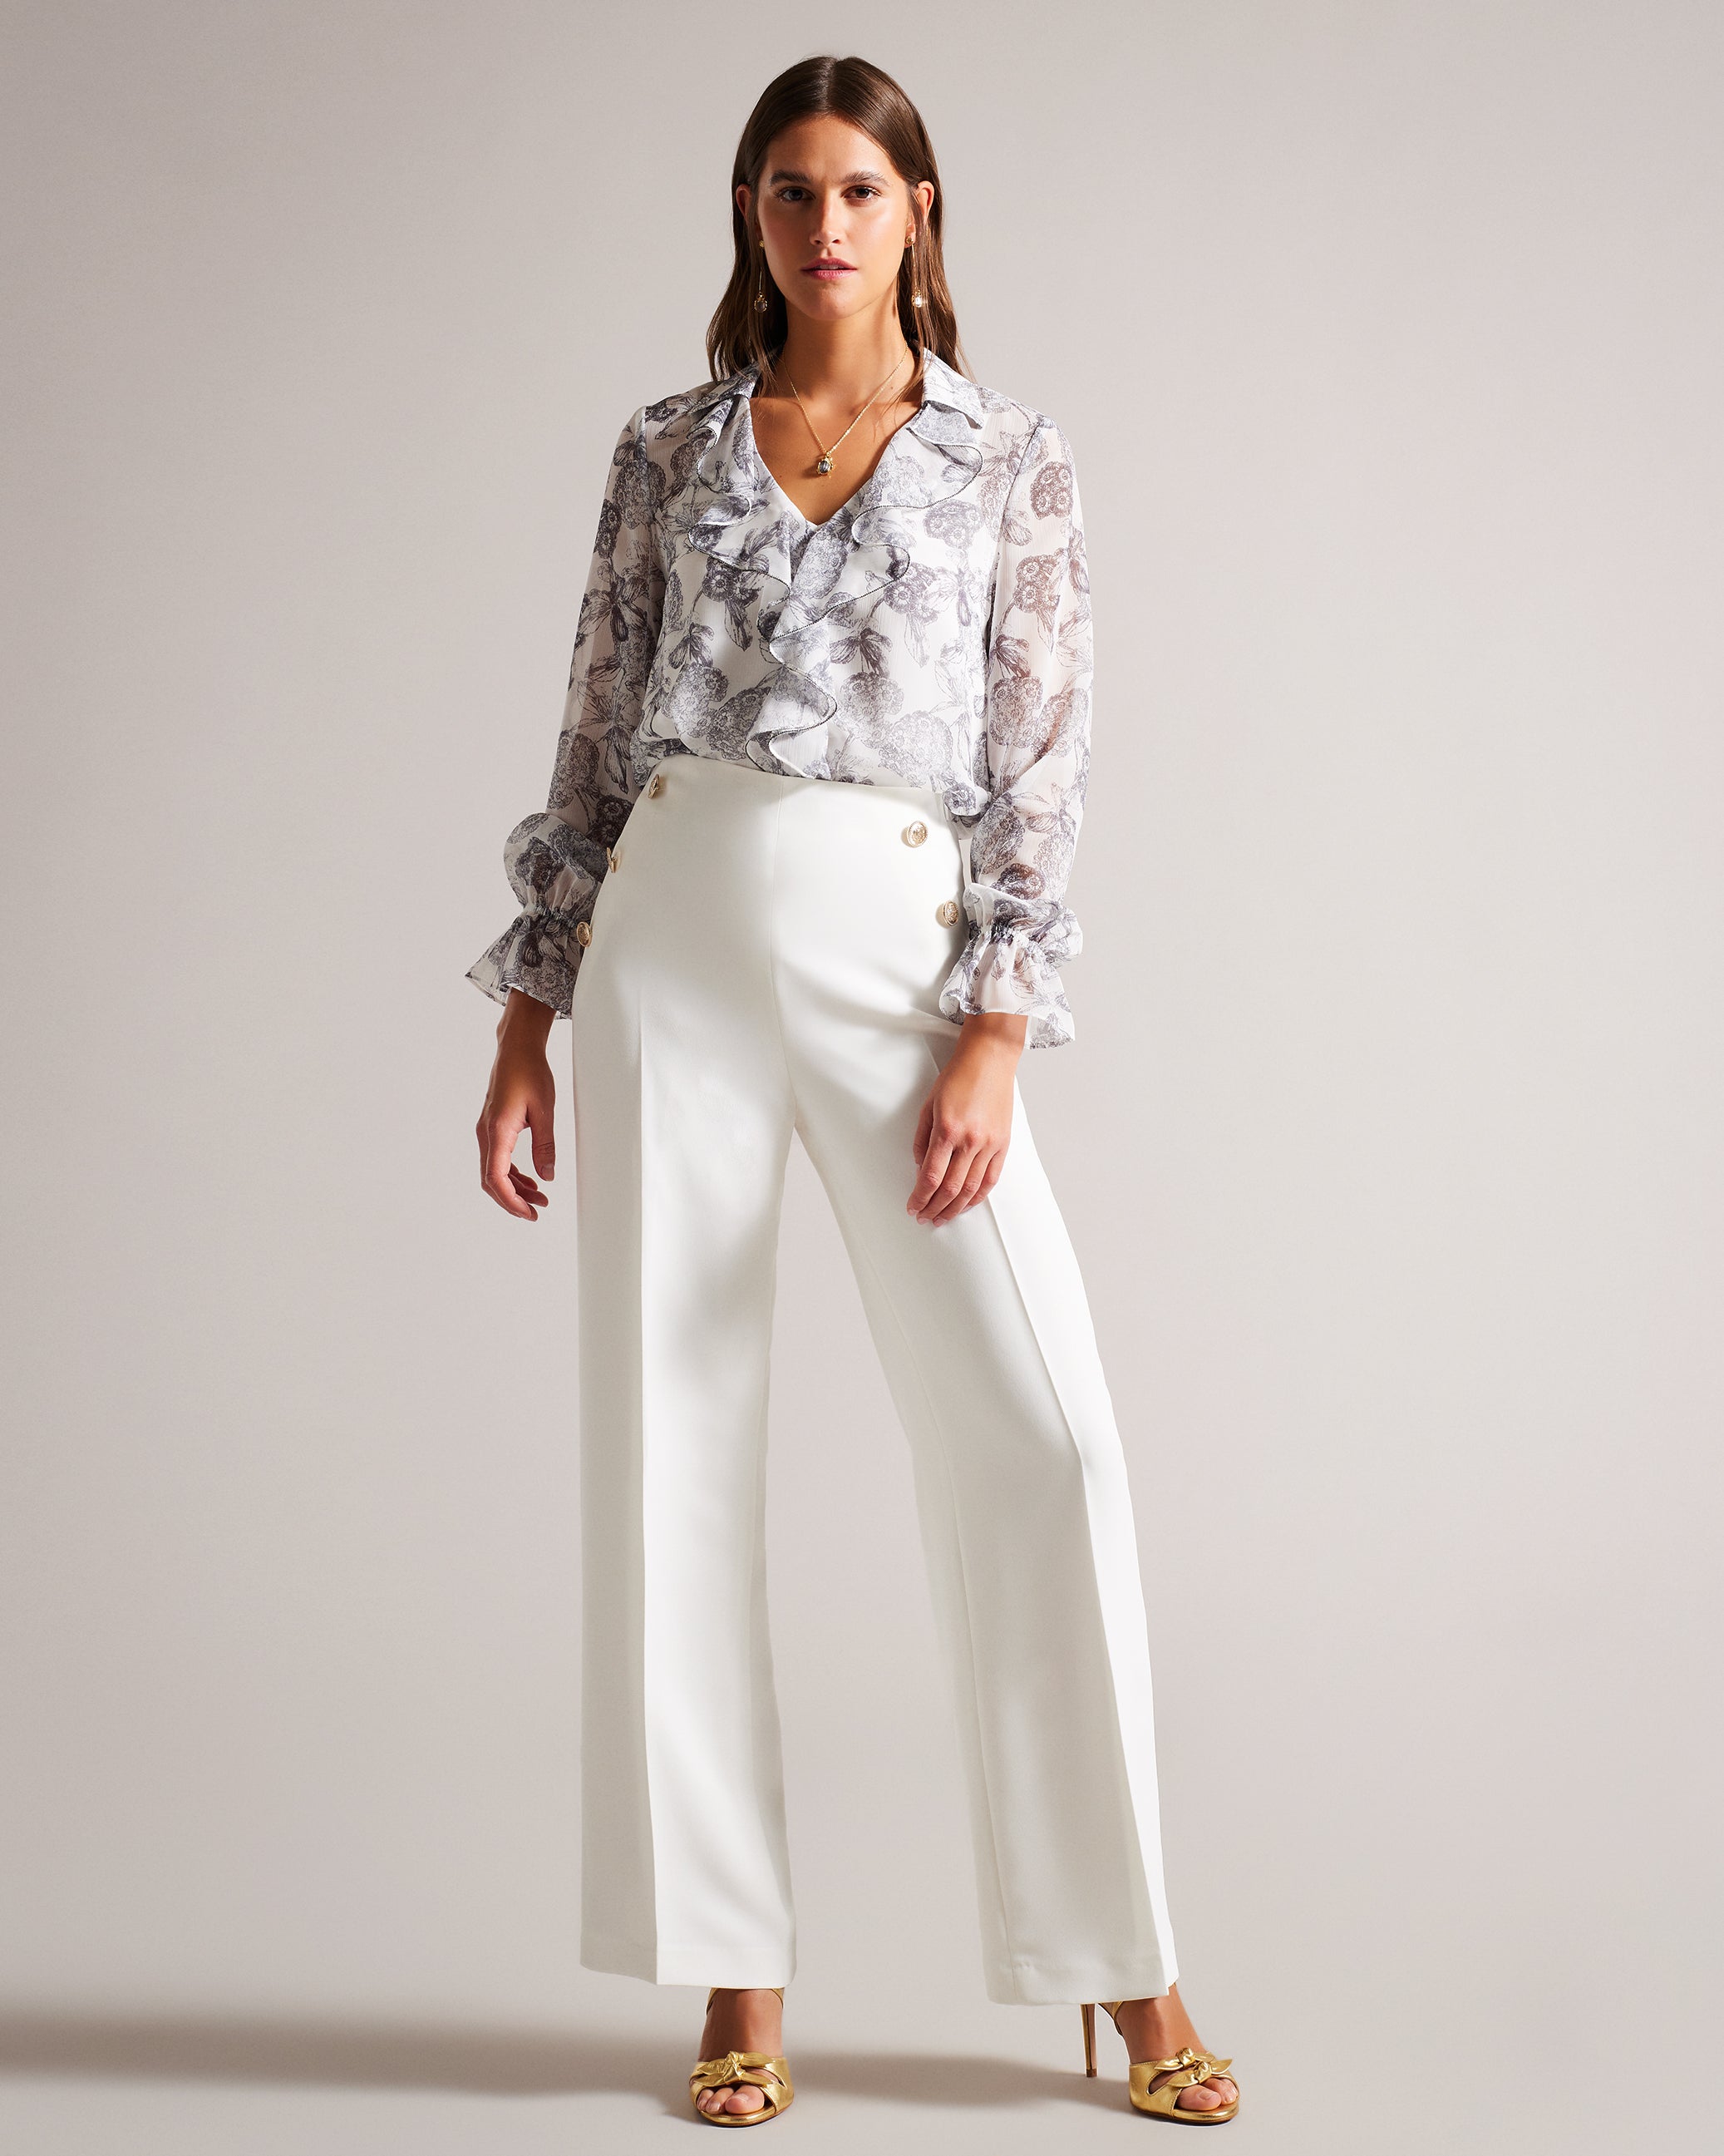 Women's Pants & Shorts – Ted Baker, United States